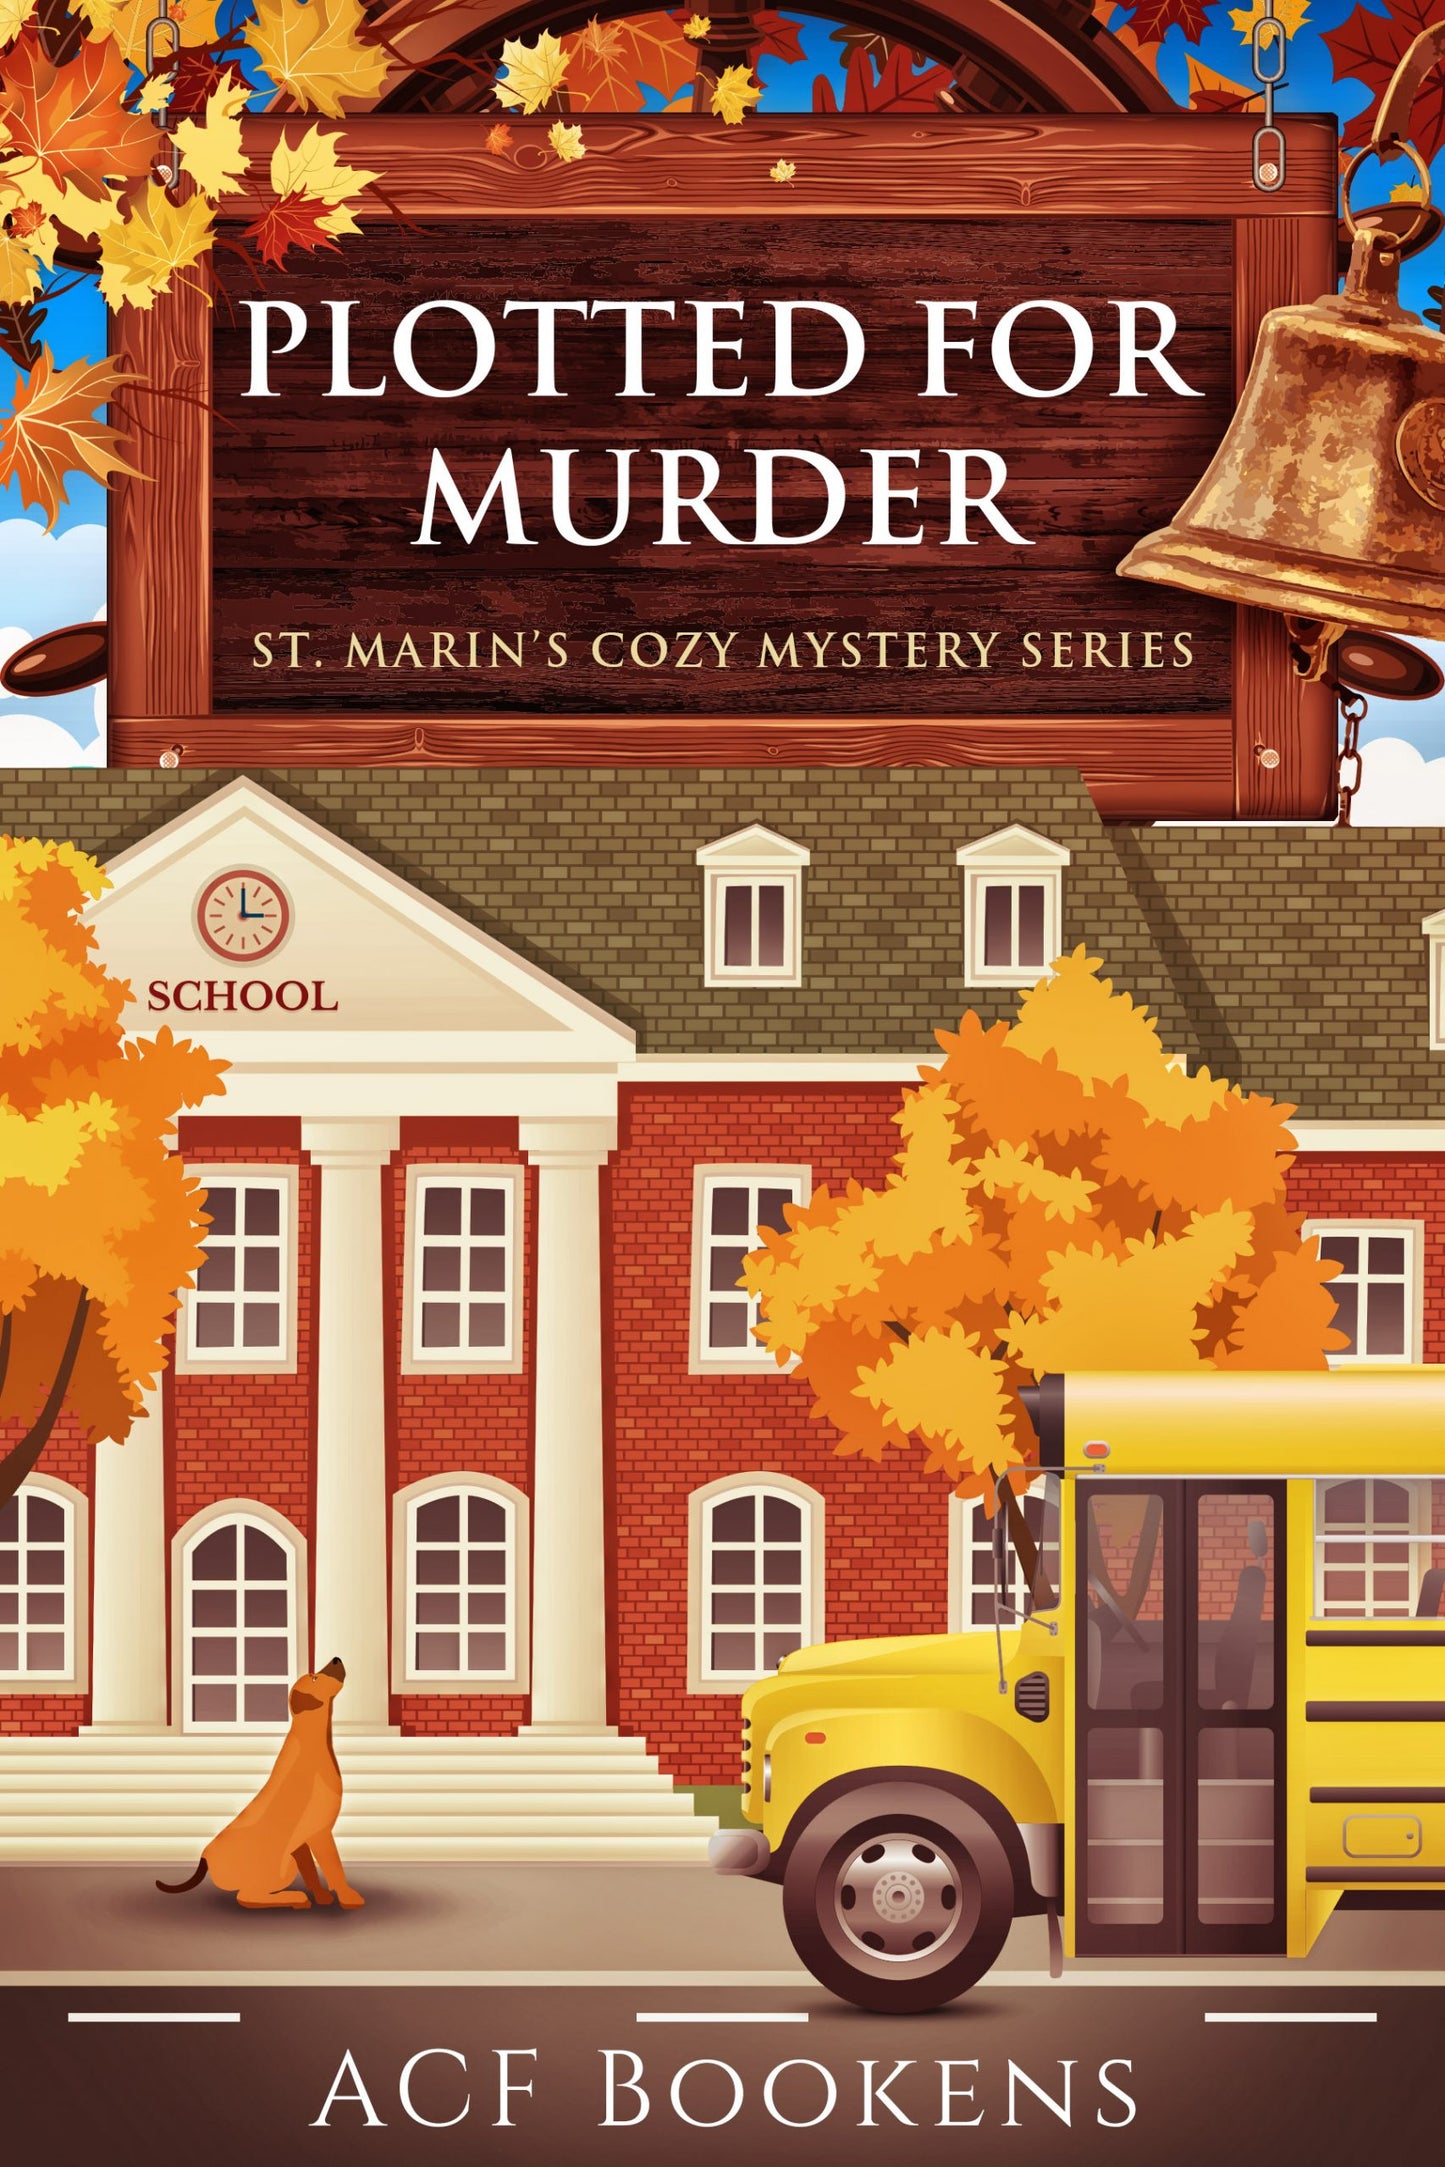 Plotted For Murder (St. Marin's Cozy Mystery Series Book 4)